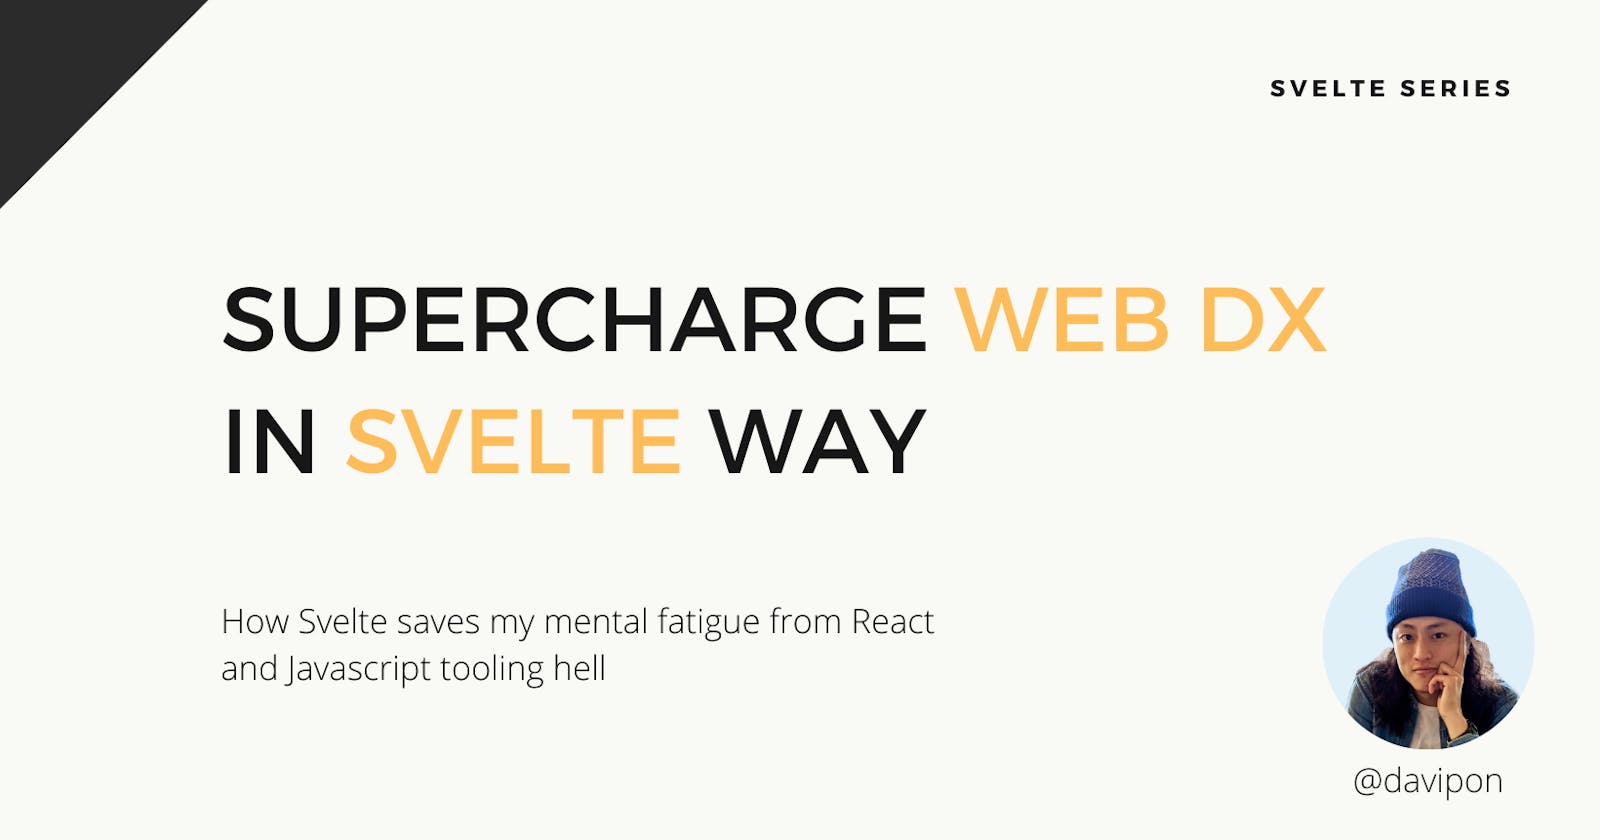 Supercharge Web DX in Svelte way